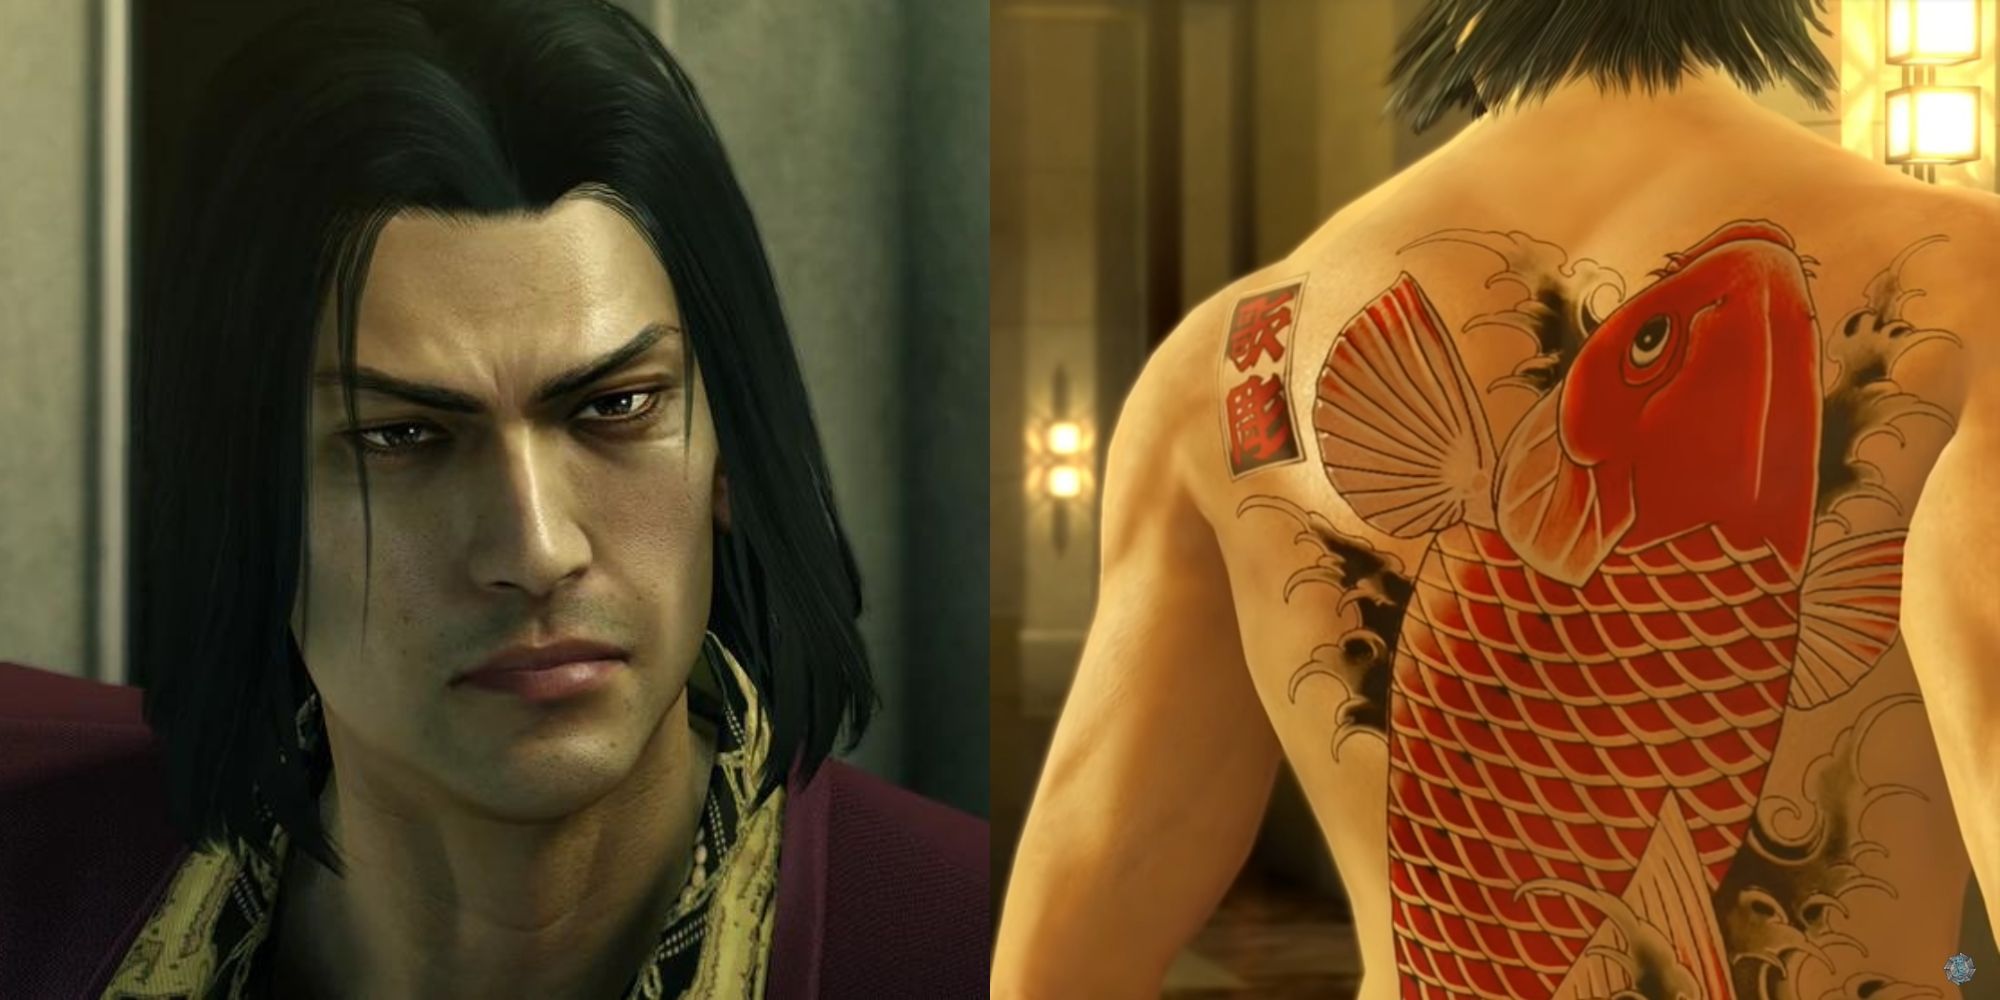 Tattoo Your PS4 with Yakuza Remastered Collection Theme